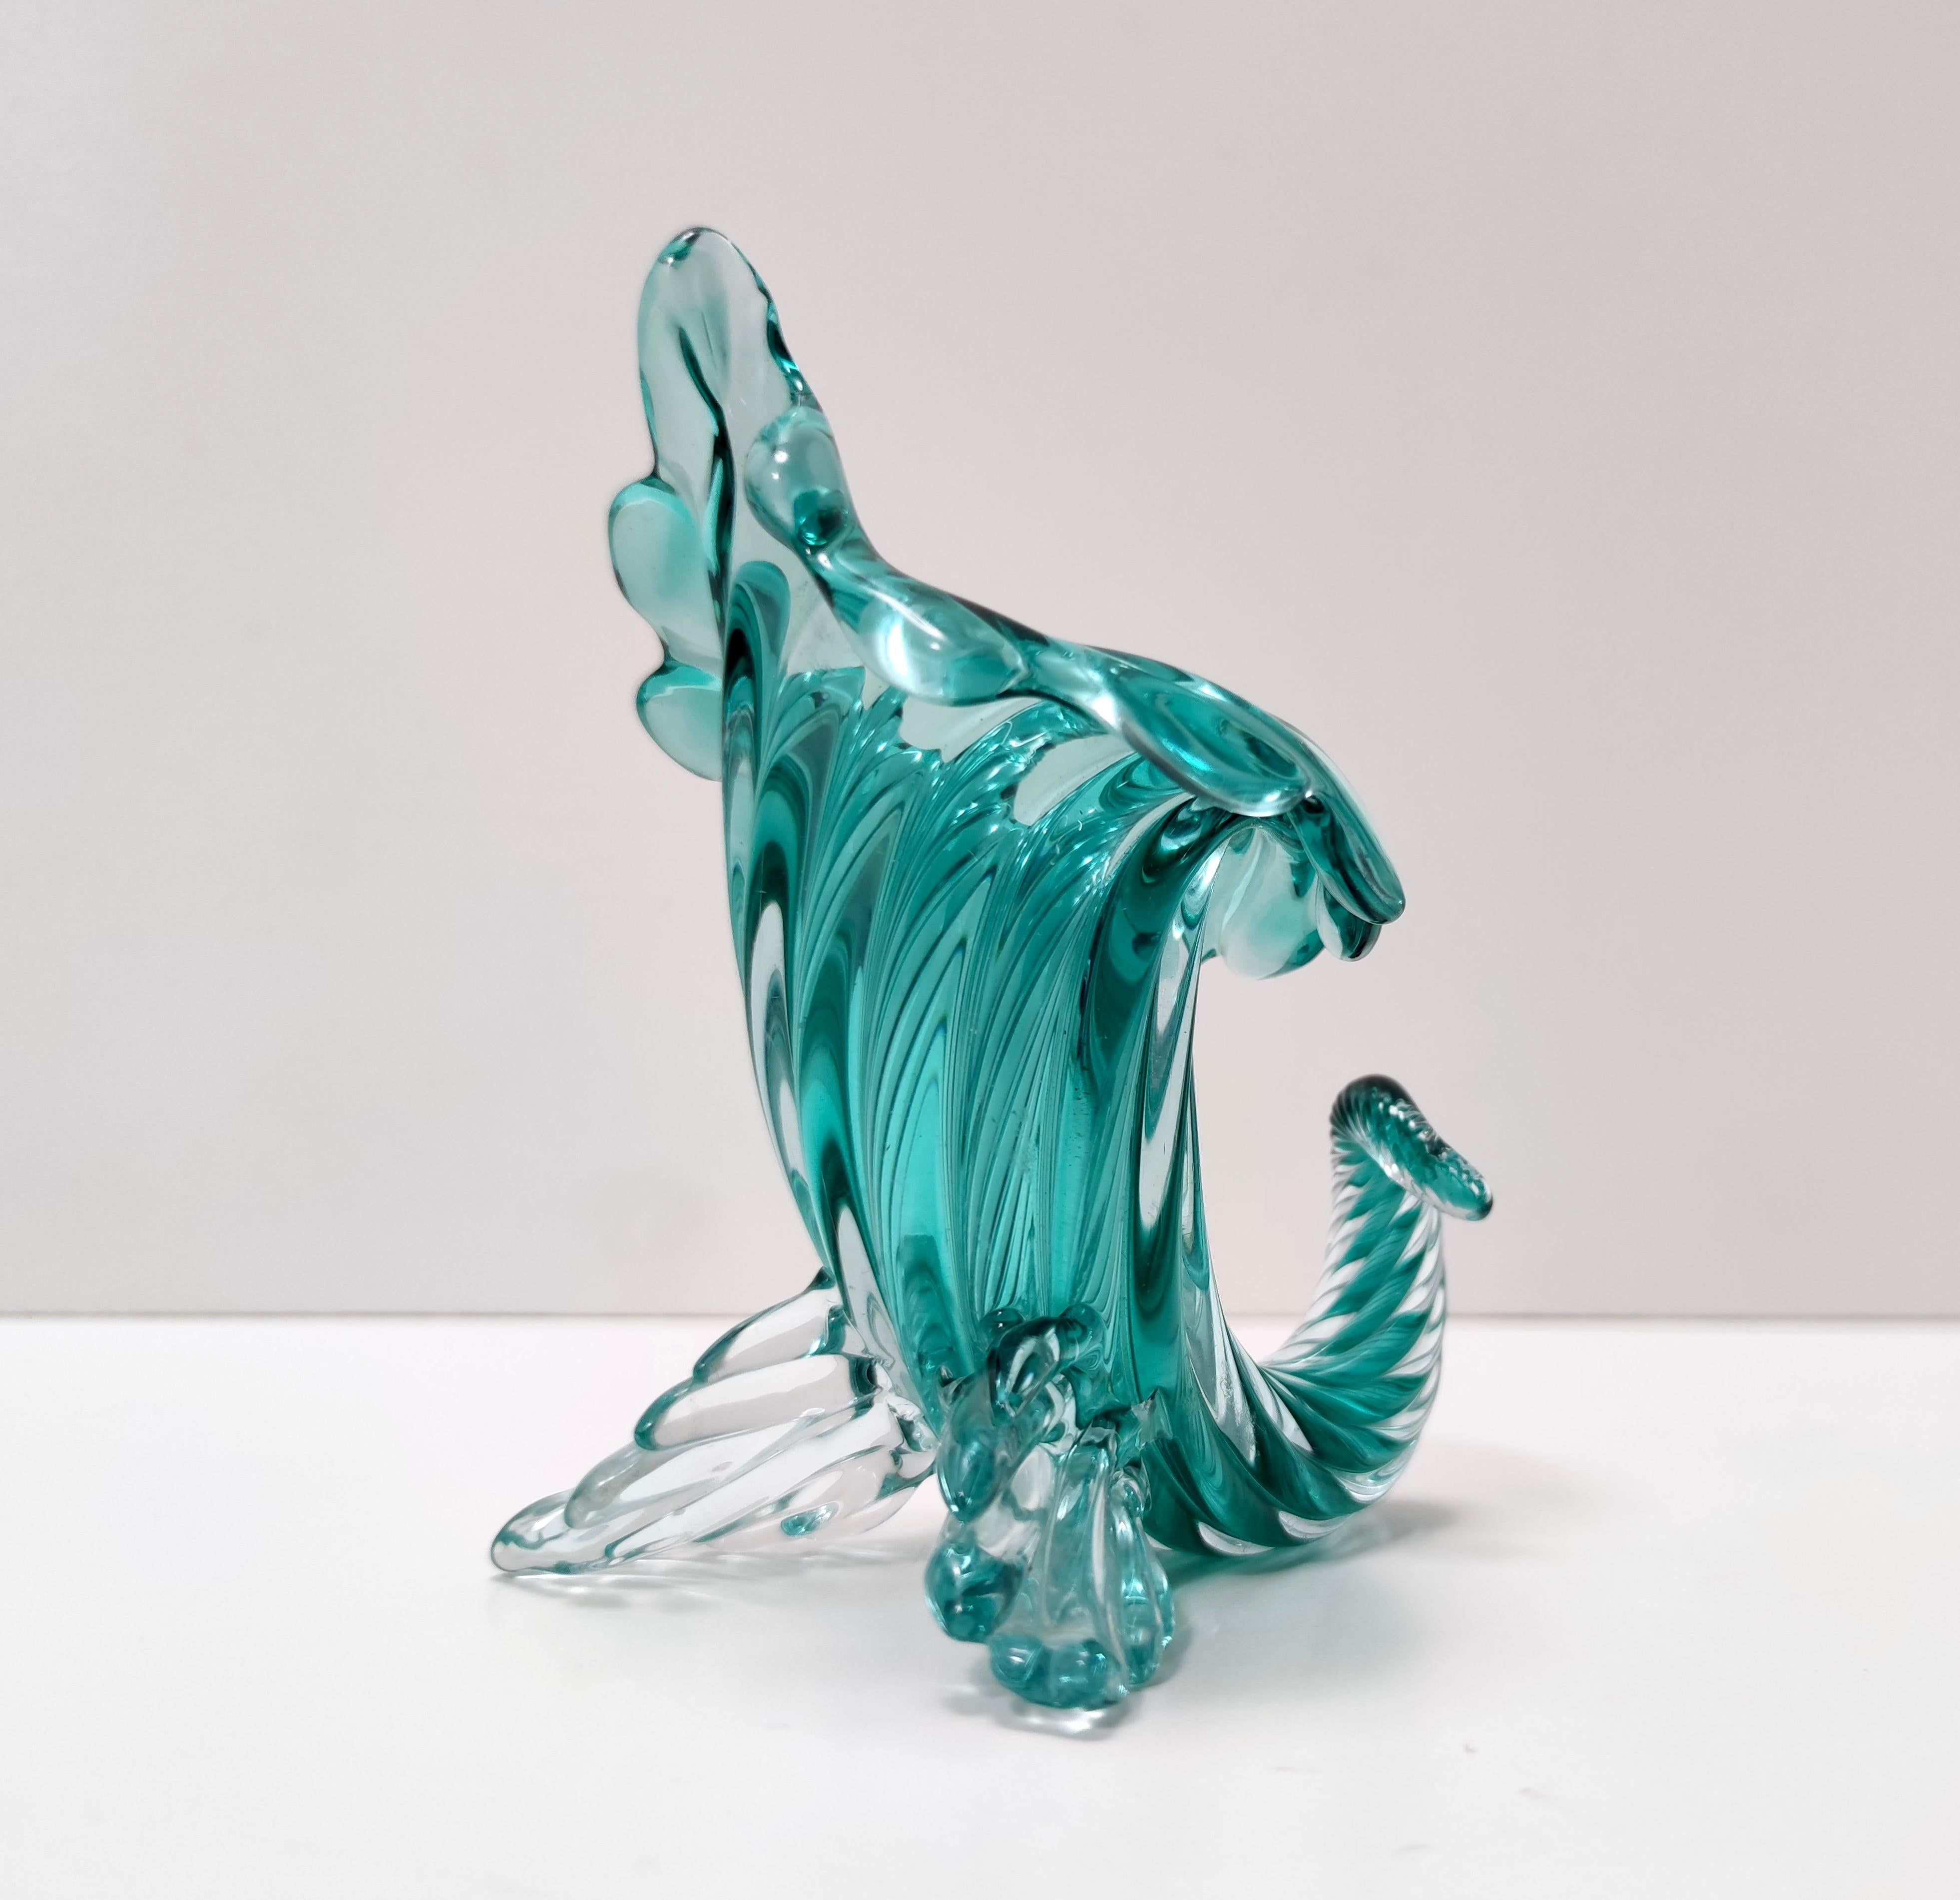 Vintage Teal Murano Glass Cornucopia Vase by Archimede Seguso, Italy In Excellent Condition For Sale In Bresso, Lombardy